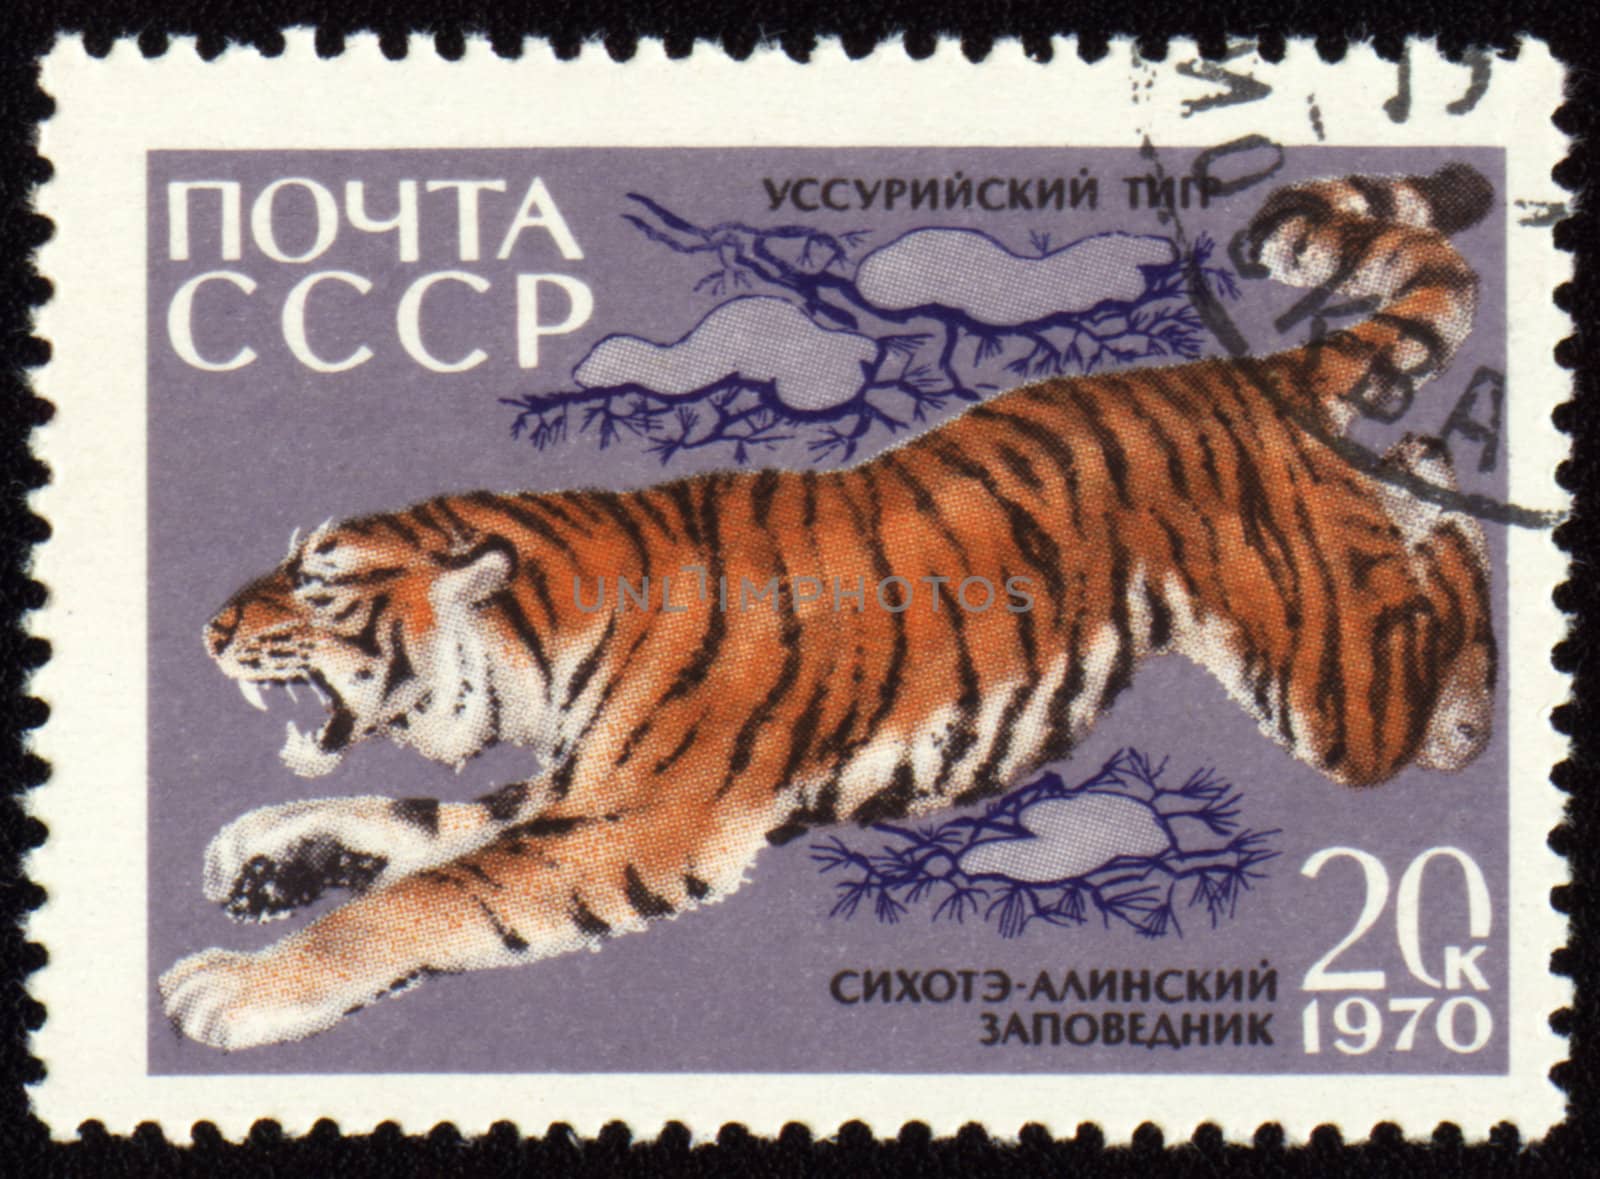 USSR - CIRCA 1970: post stamp printed in USSR shows jumping Ussurian Tiger, series Animals from Sikhote-Alin Reserve, circa 1970